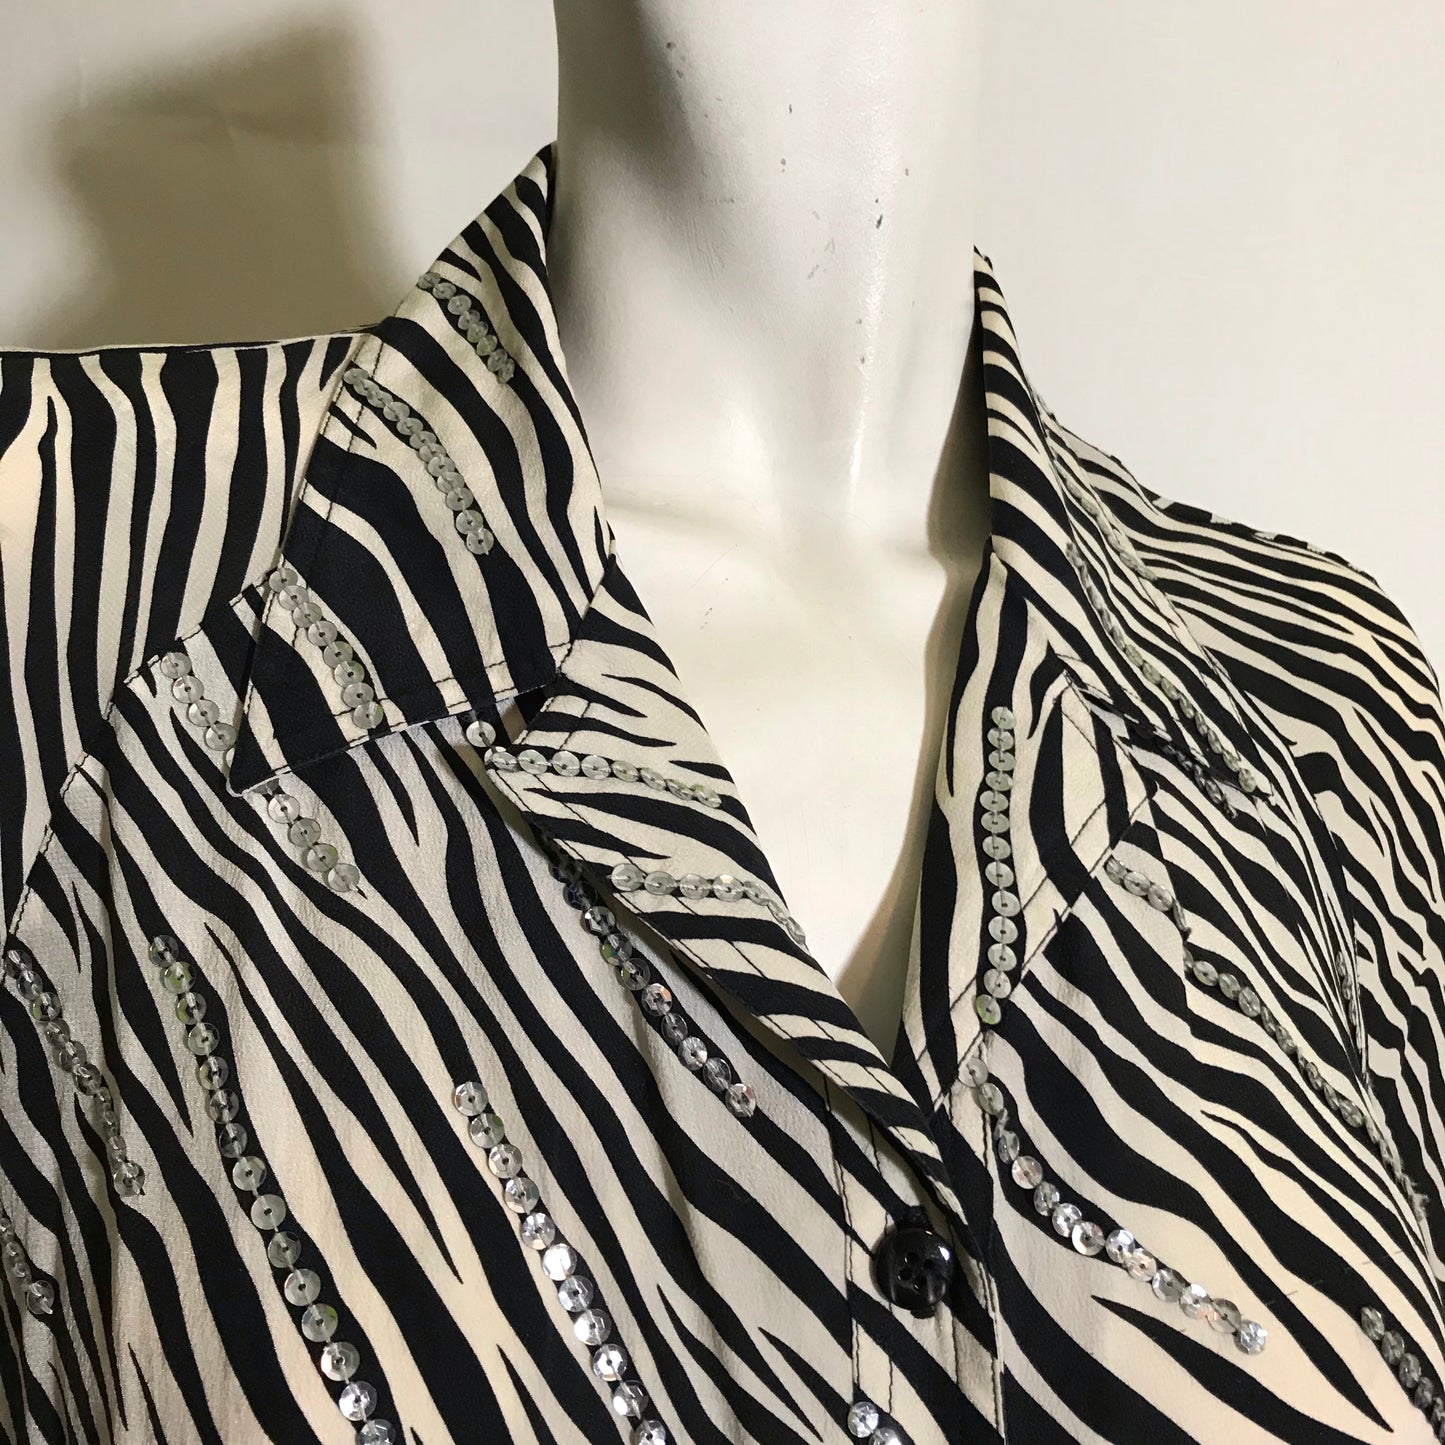 Chic Zebra Striped Silk Swing Cut Blouse with Sequins circa 1990s